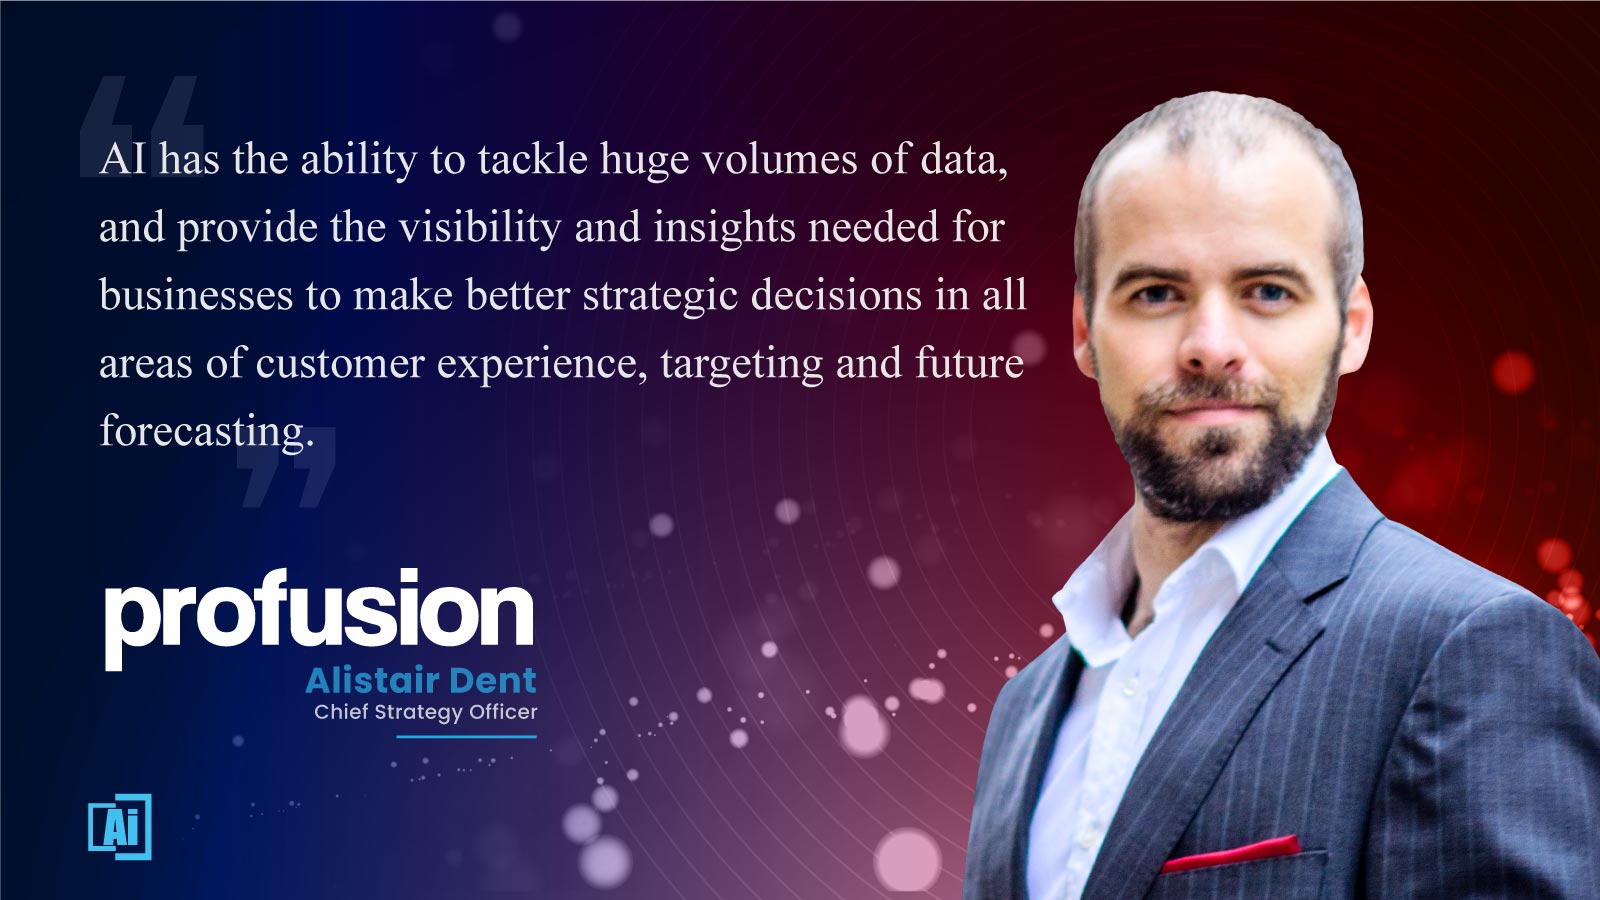 AiThority Interview with Alistair Dent, Chief Strategy Officer at Profusion